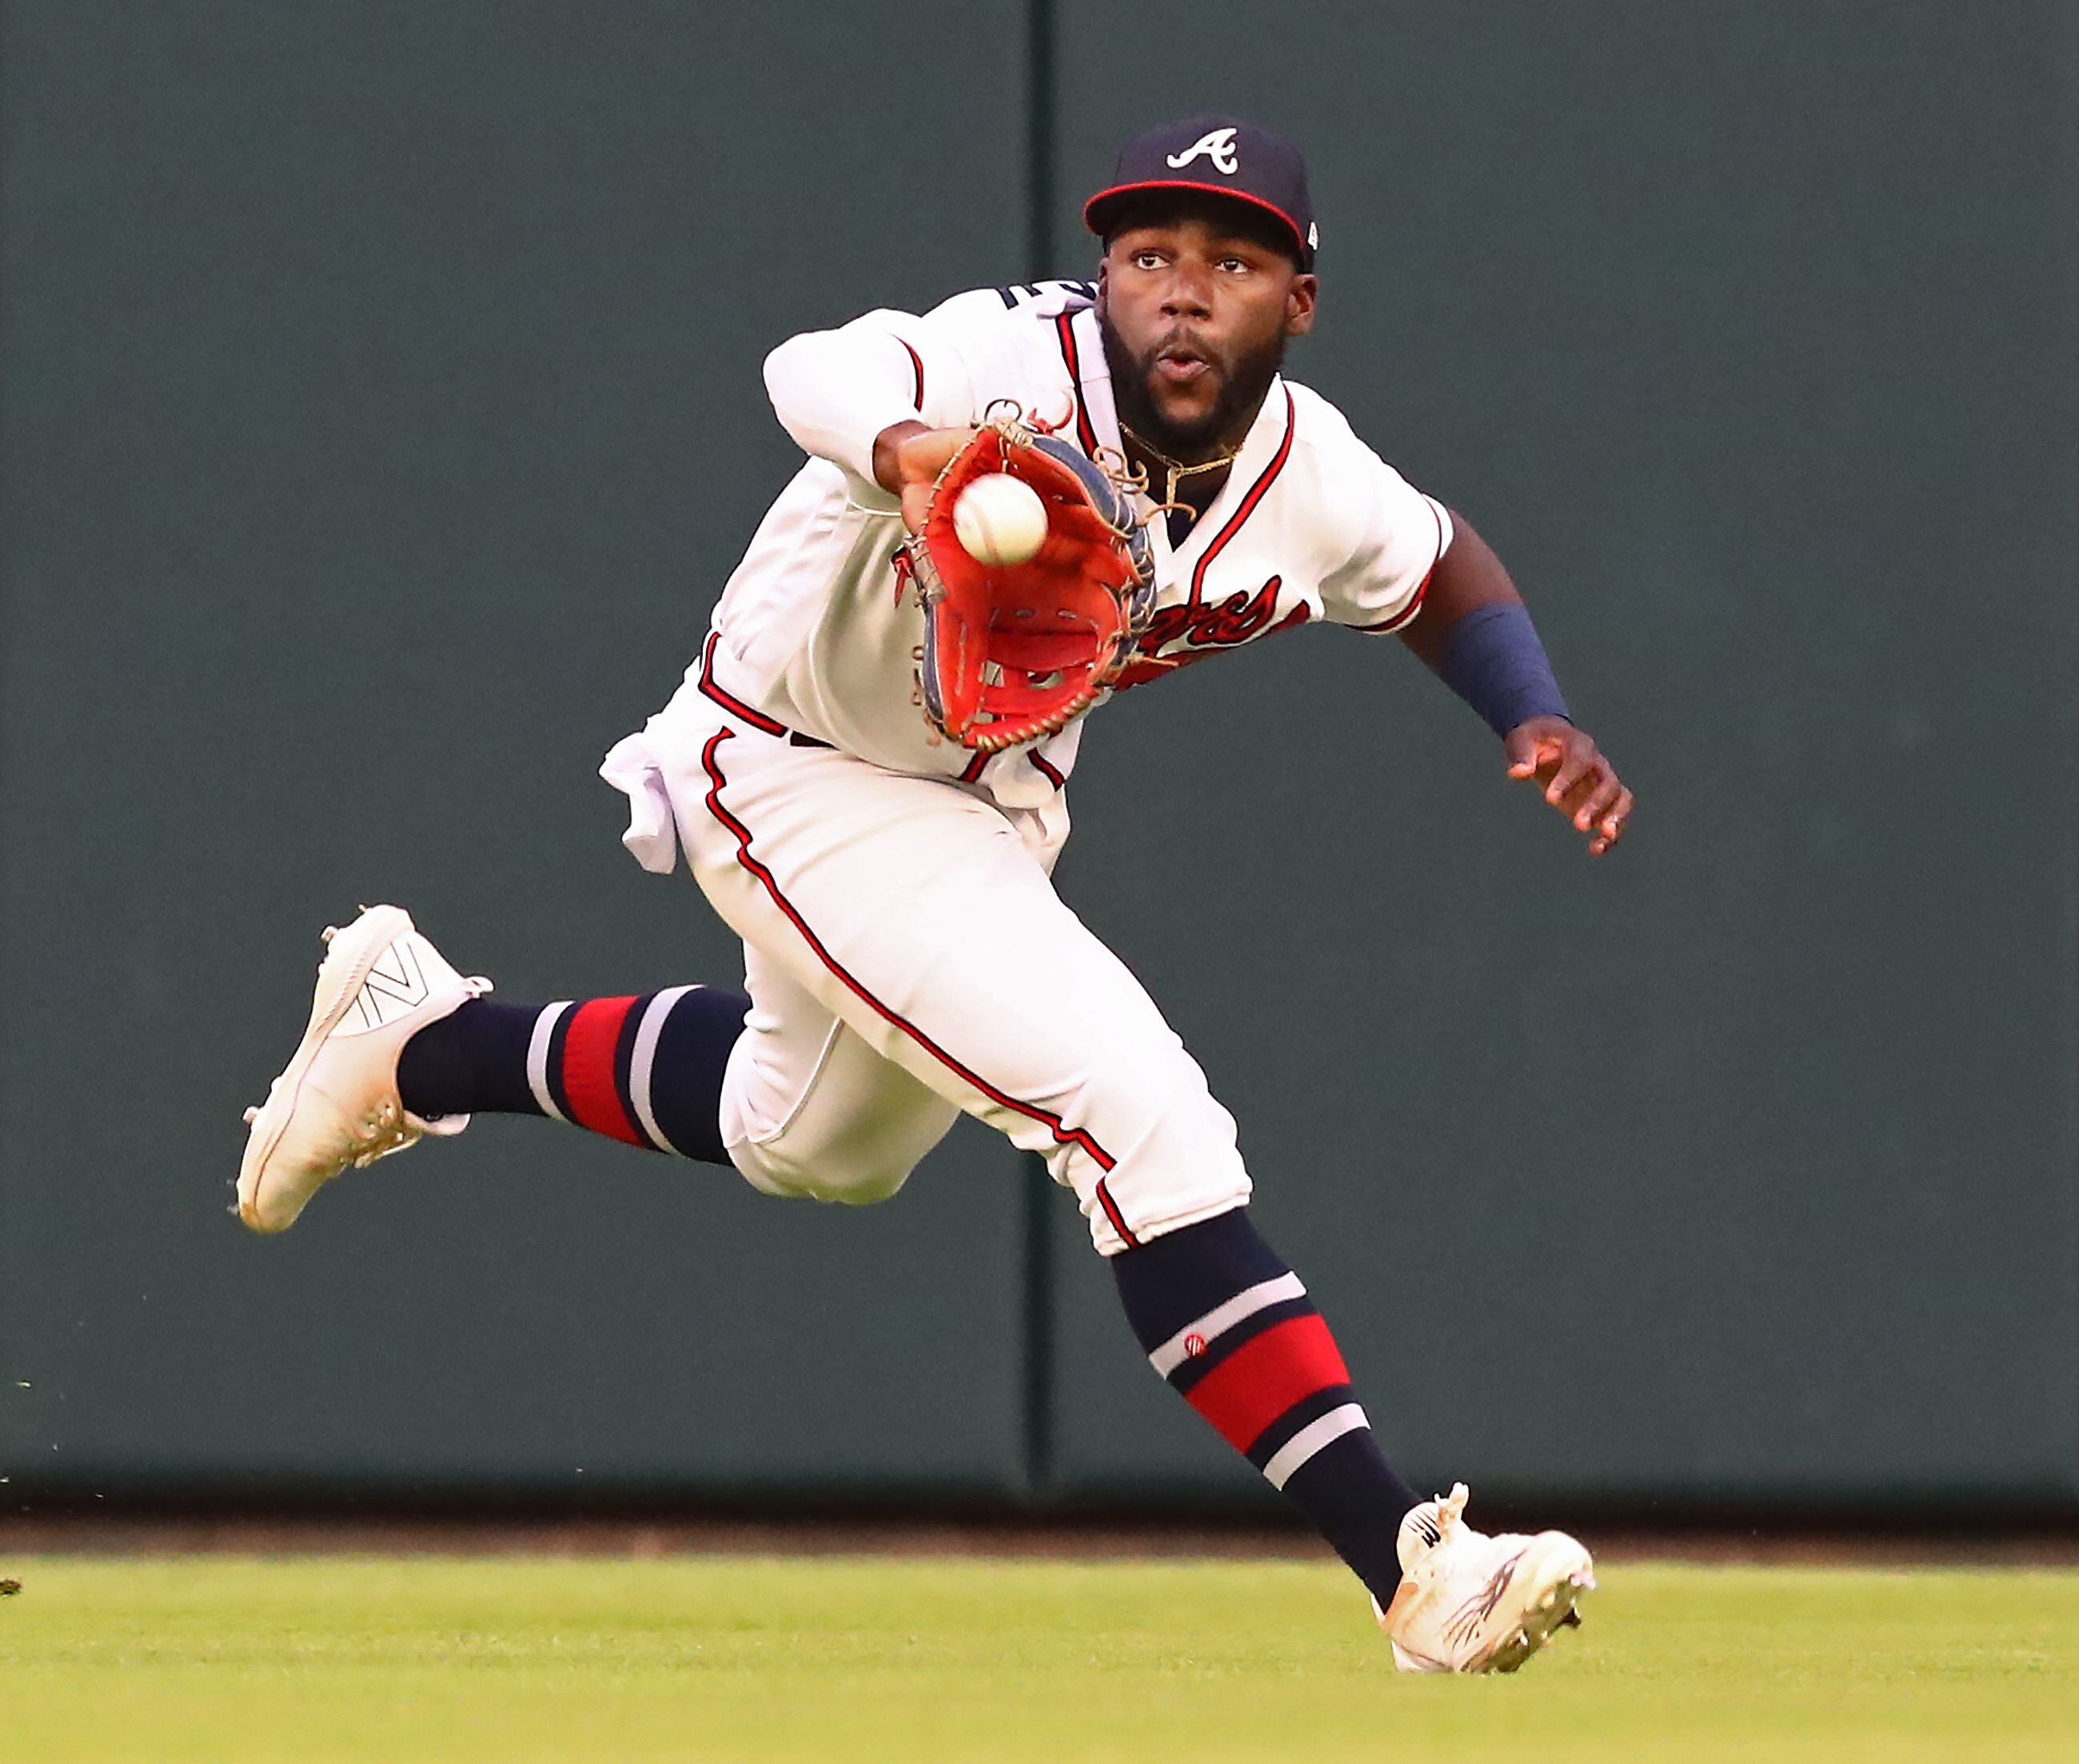 Photos: A look at Michael Harris' magical rookie season with the Braves